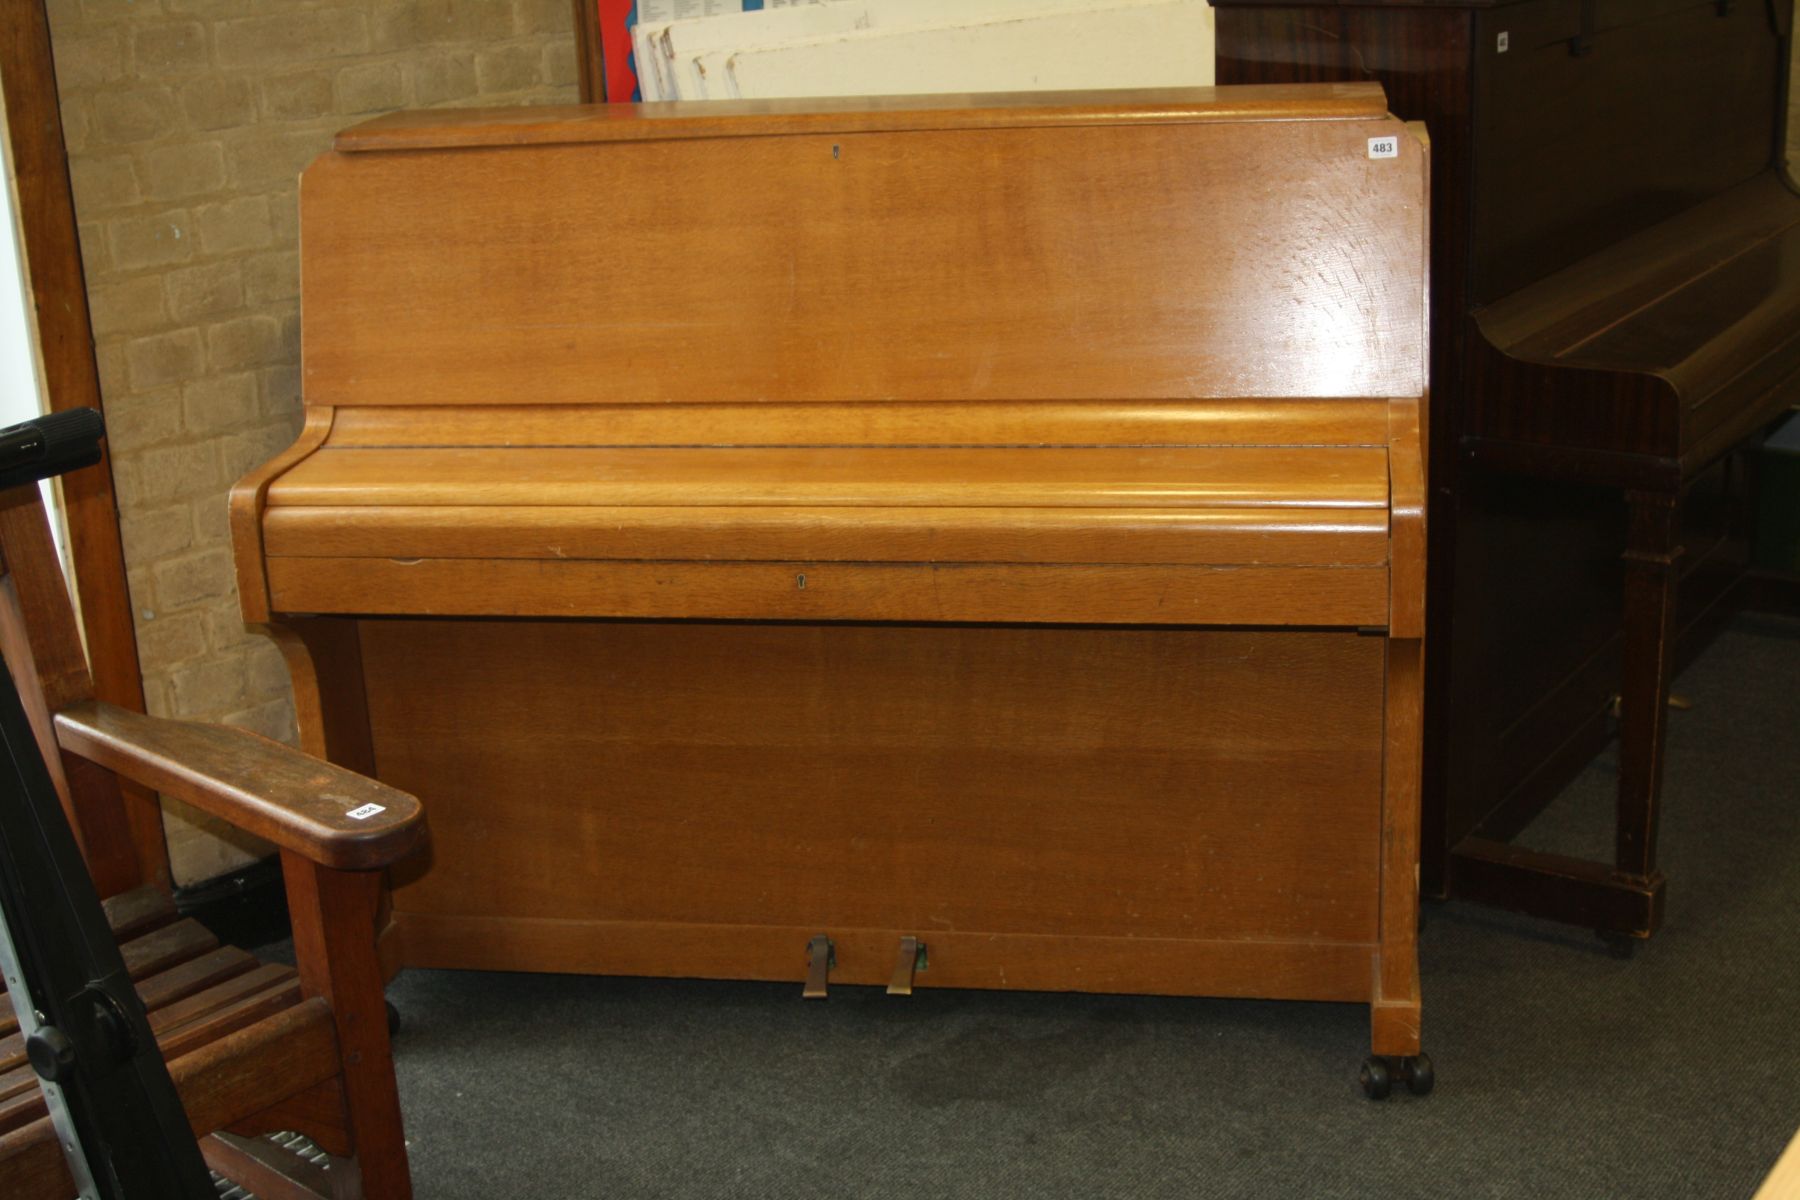 A ZENDER UPRIGHT PIANO, with oak case (s.d)